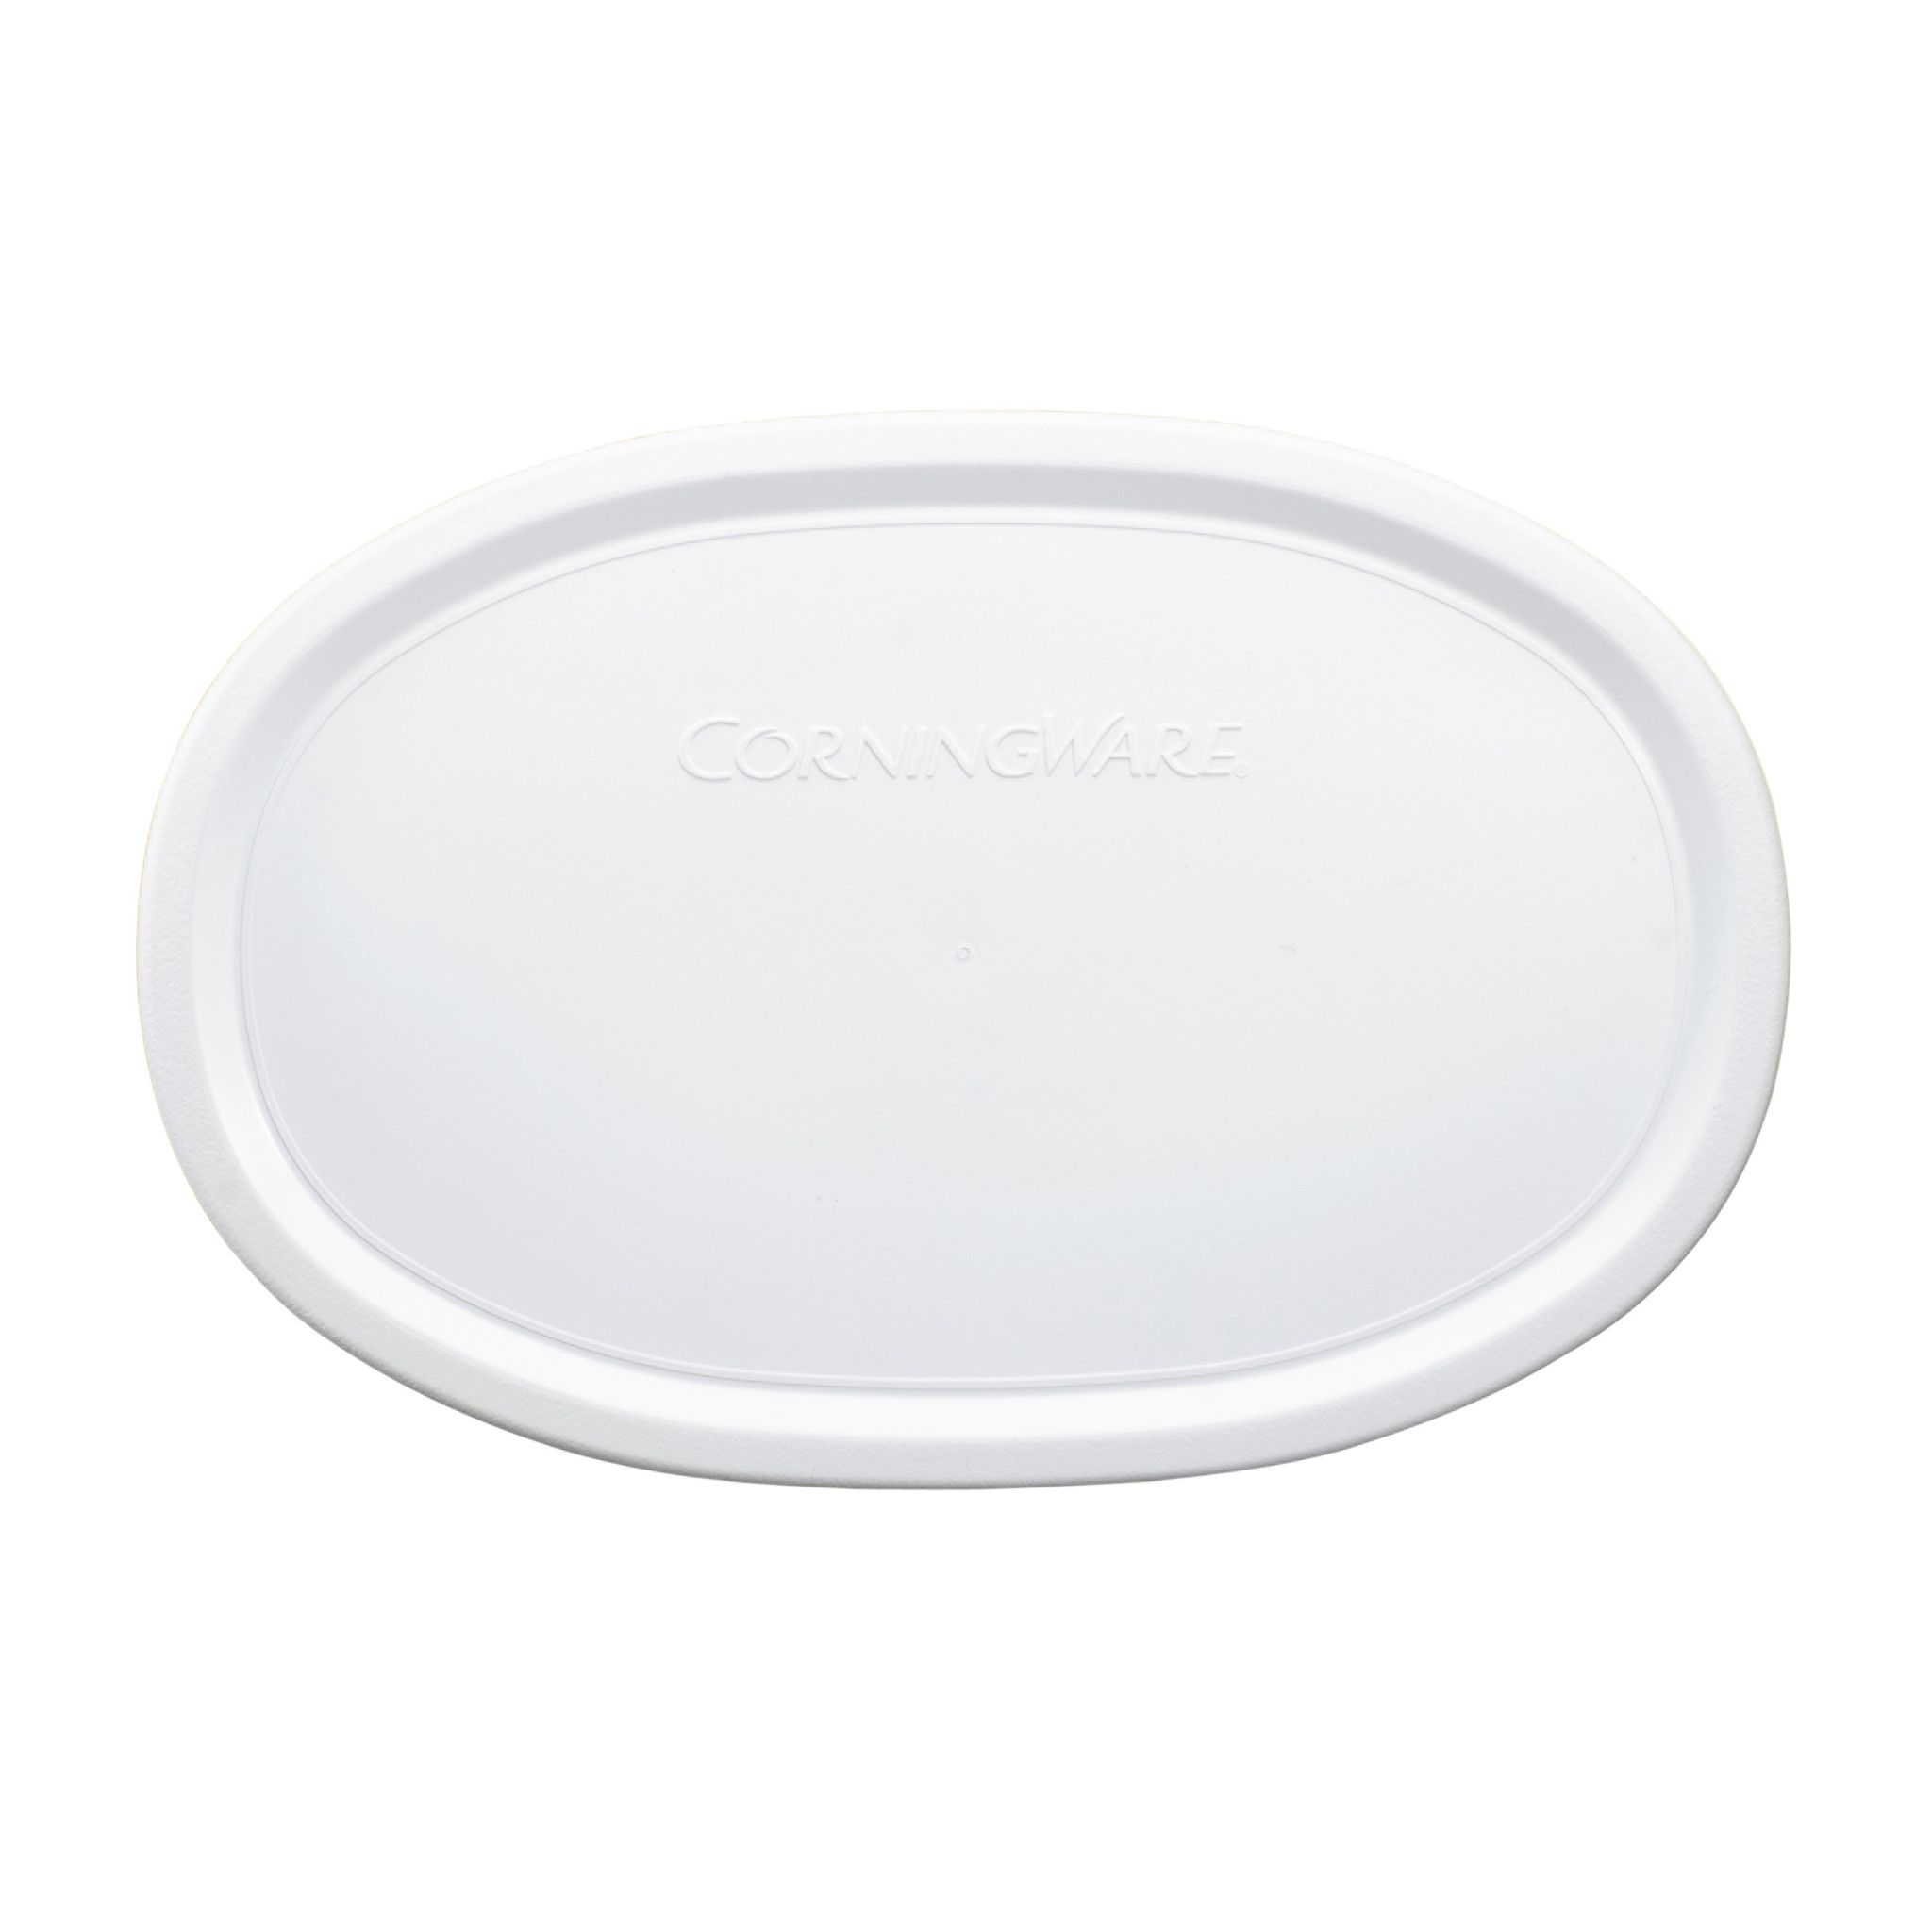 French White Plastic Lid for 23-ounce Baking Dish